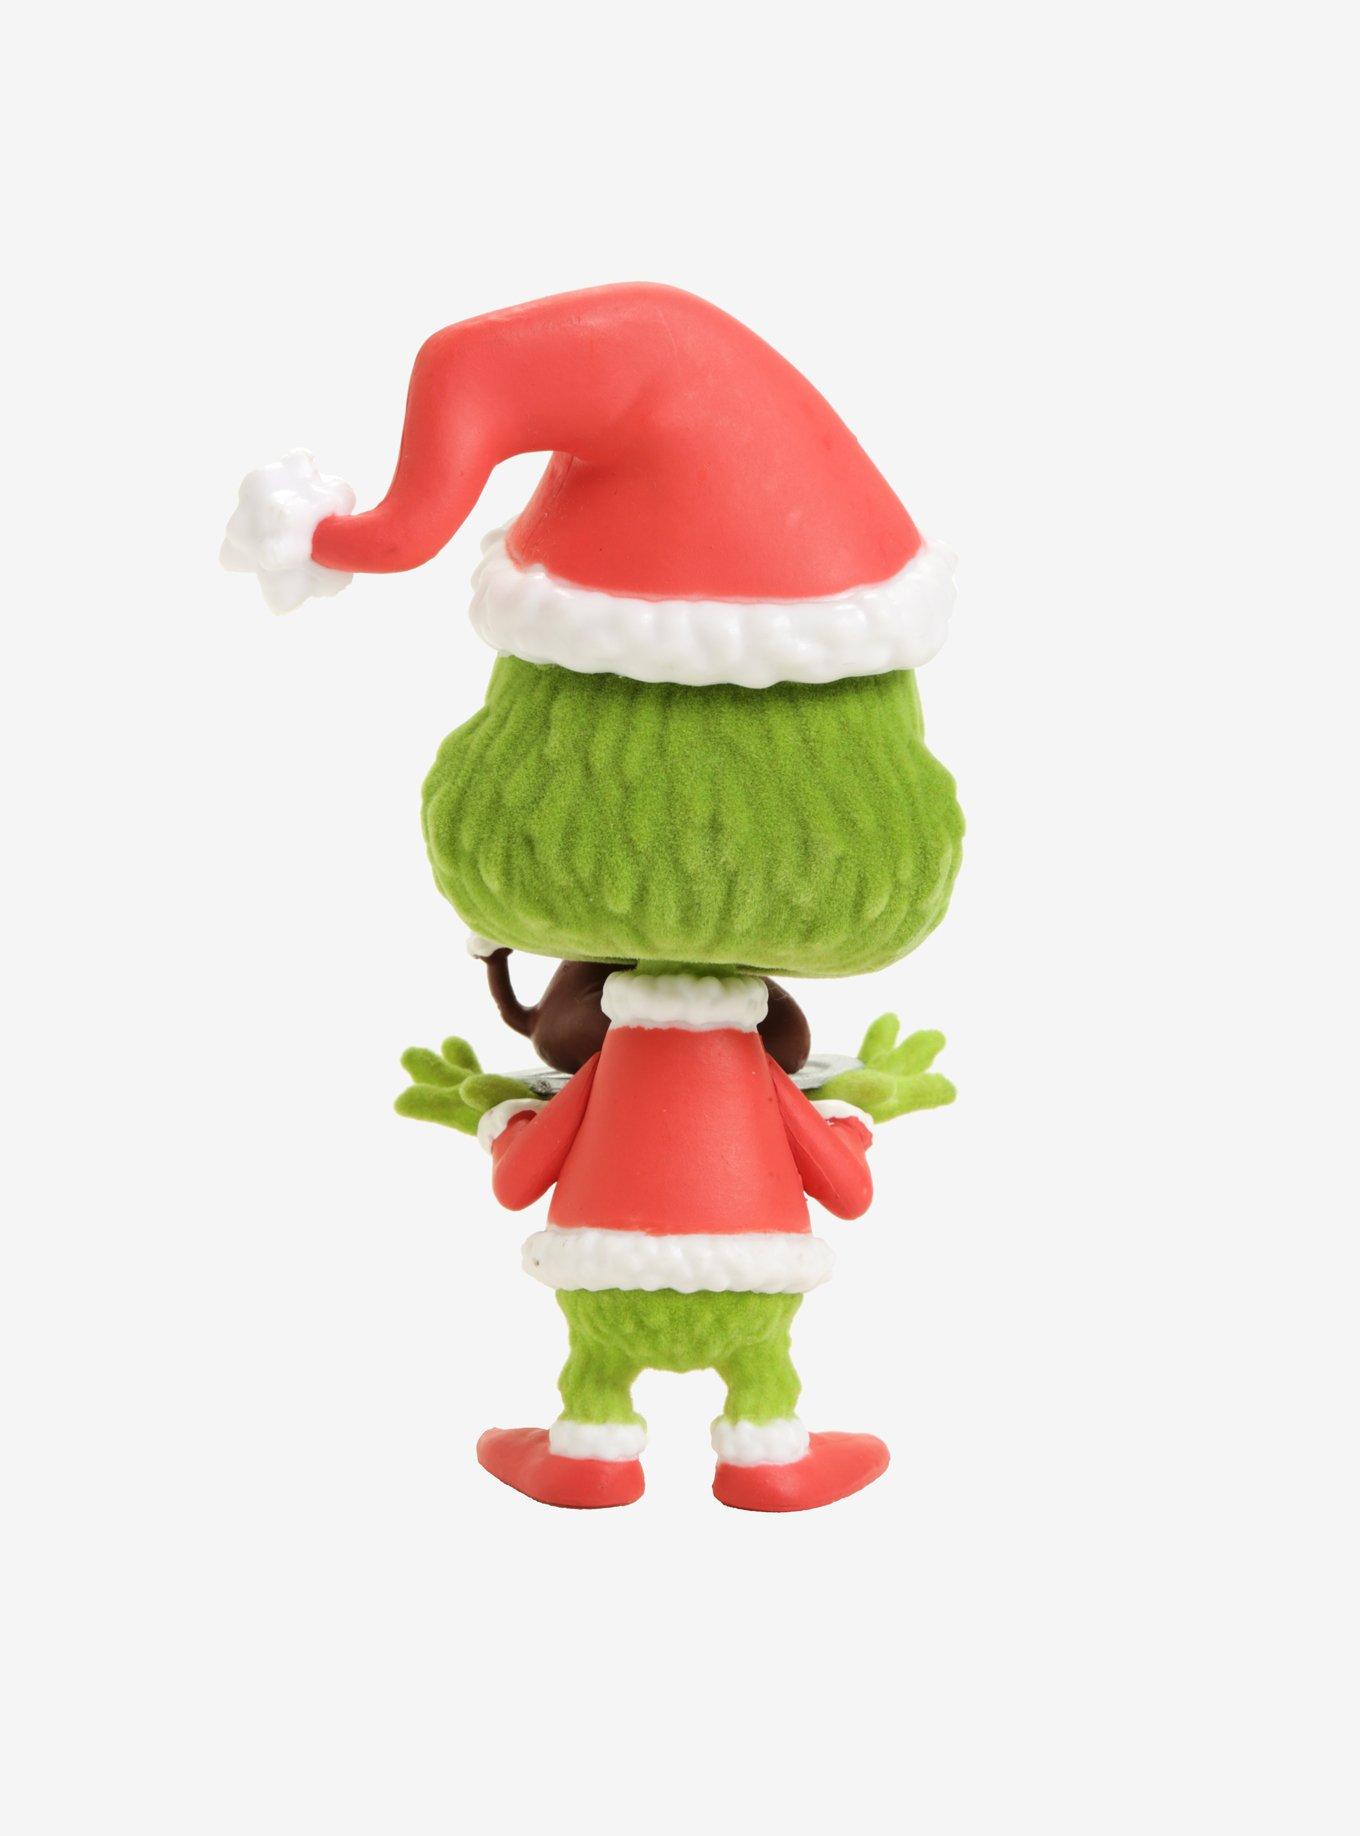 Funko Pop! Books - Dr. Seuss - The Grinch (Flocked) (Box Lunch Exclusi